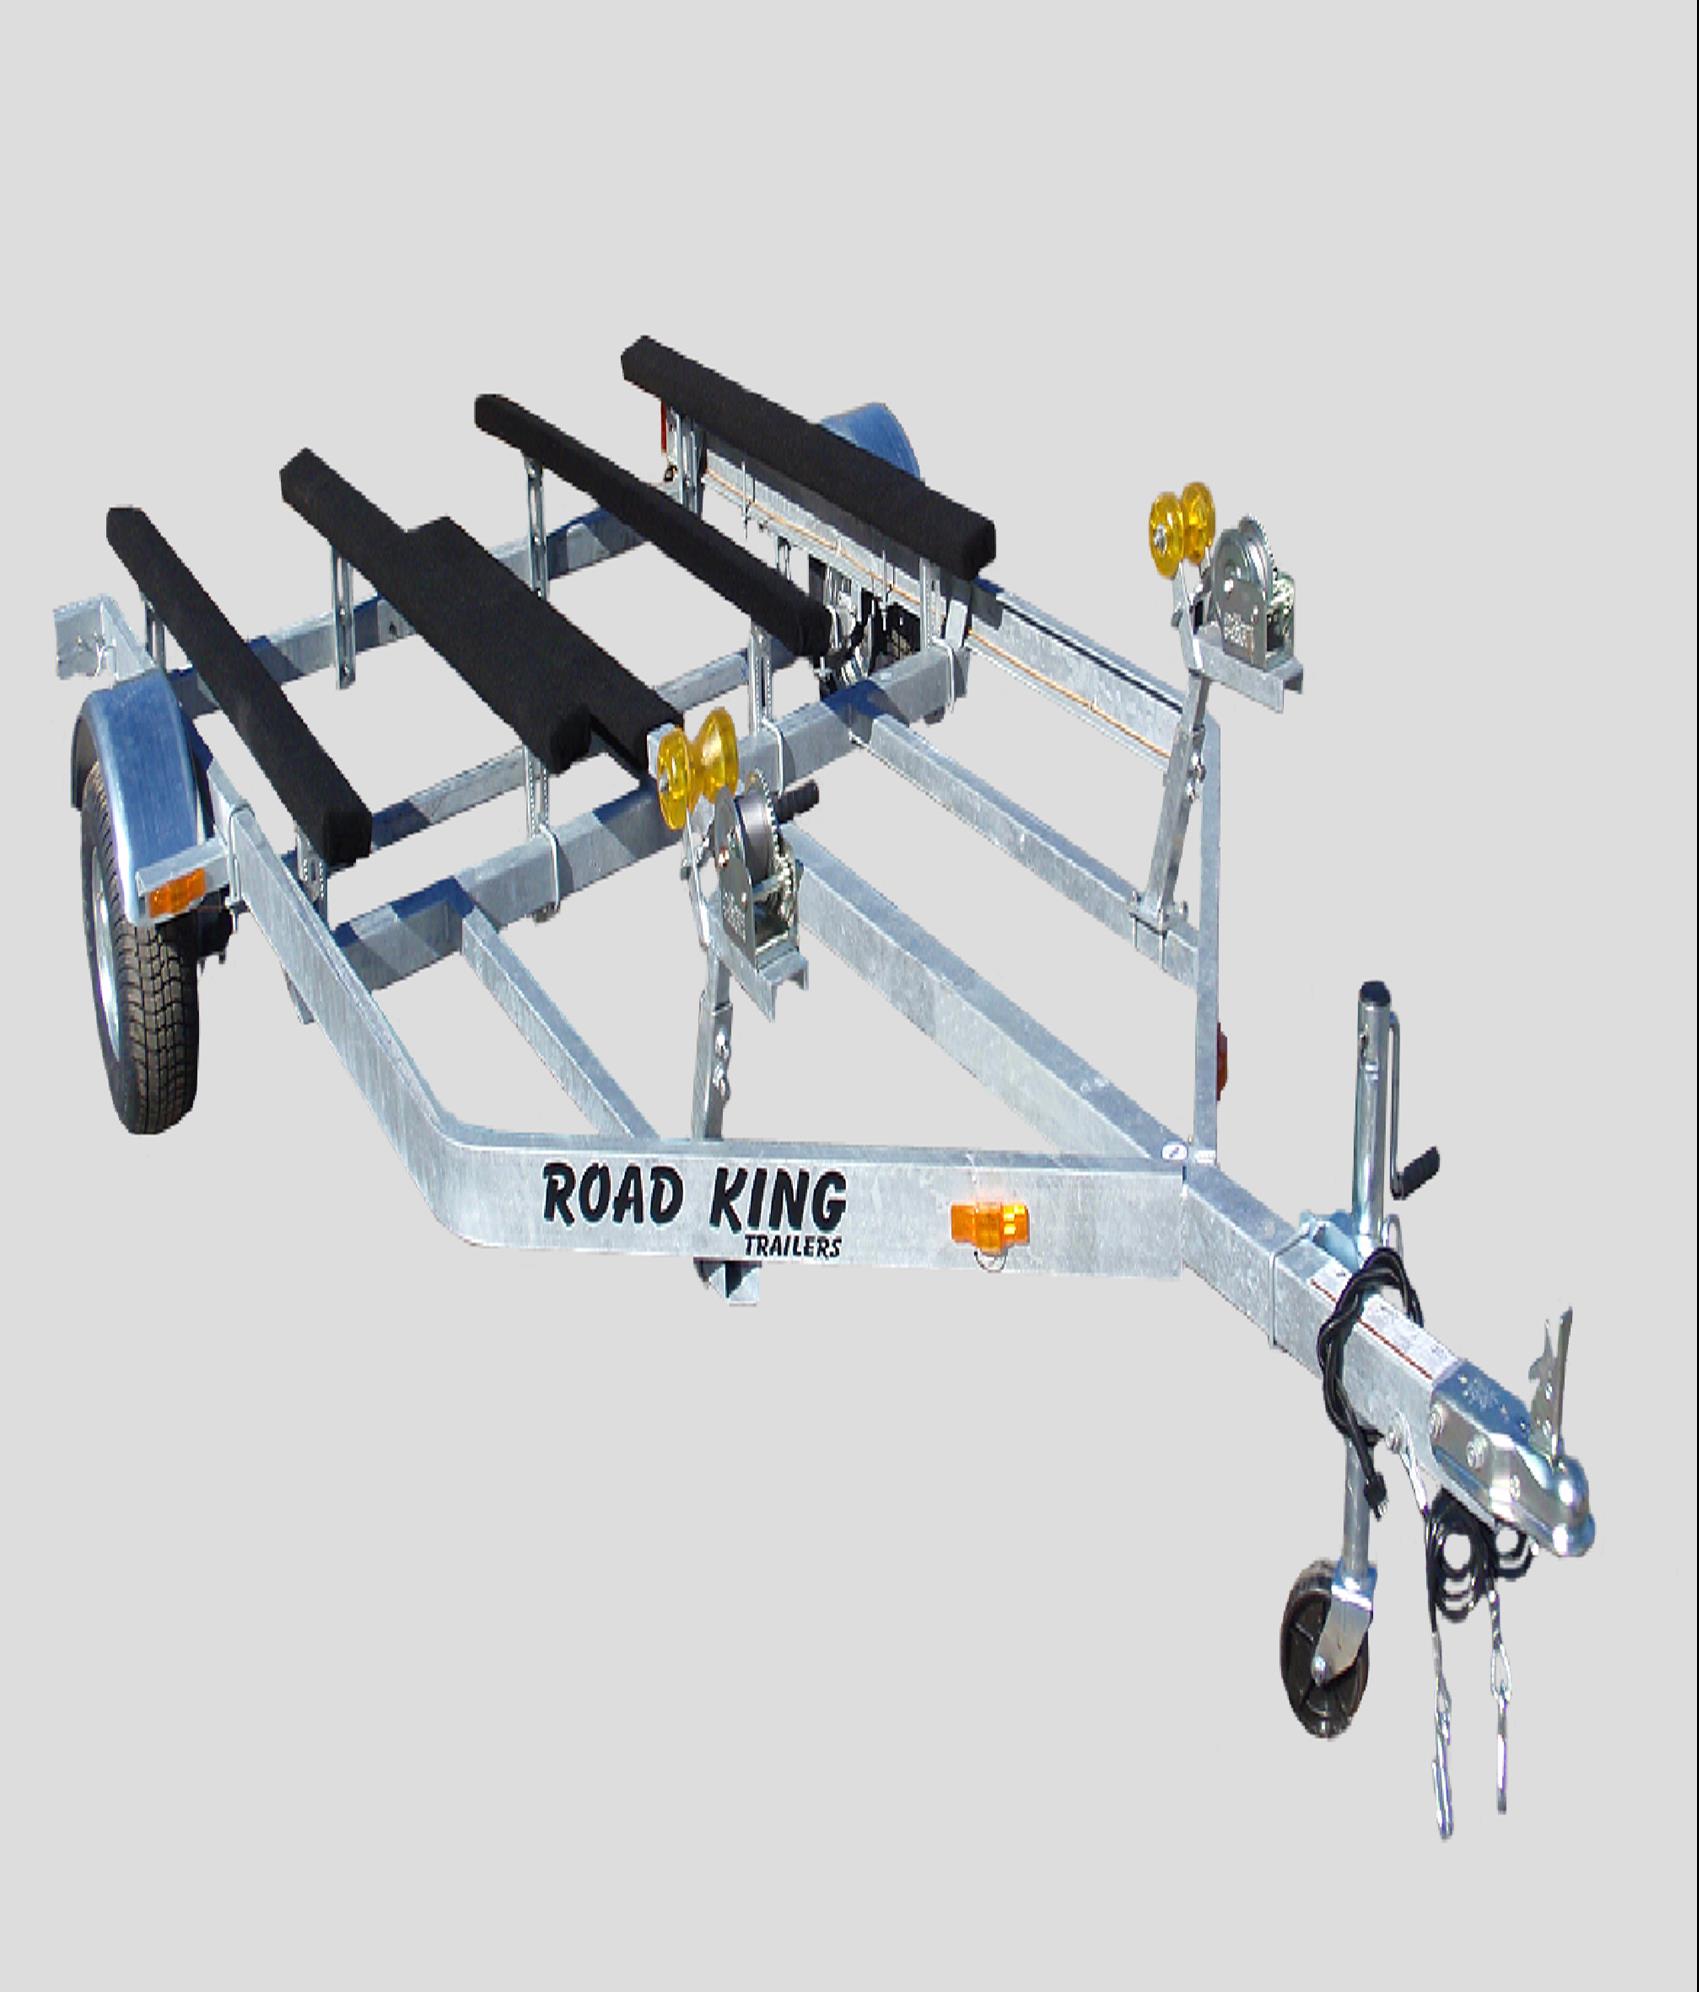 Road King Trailers